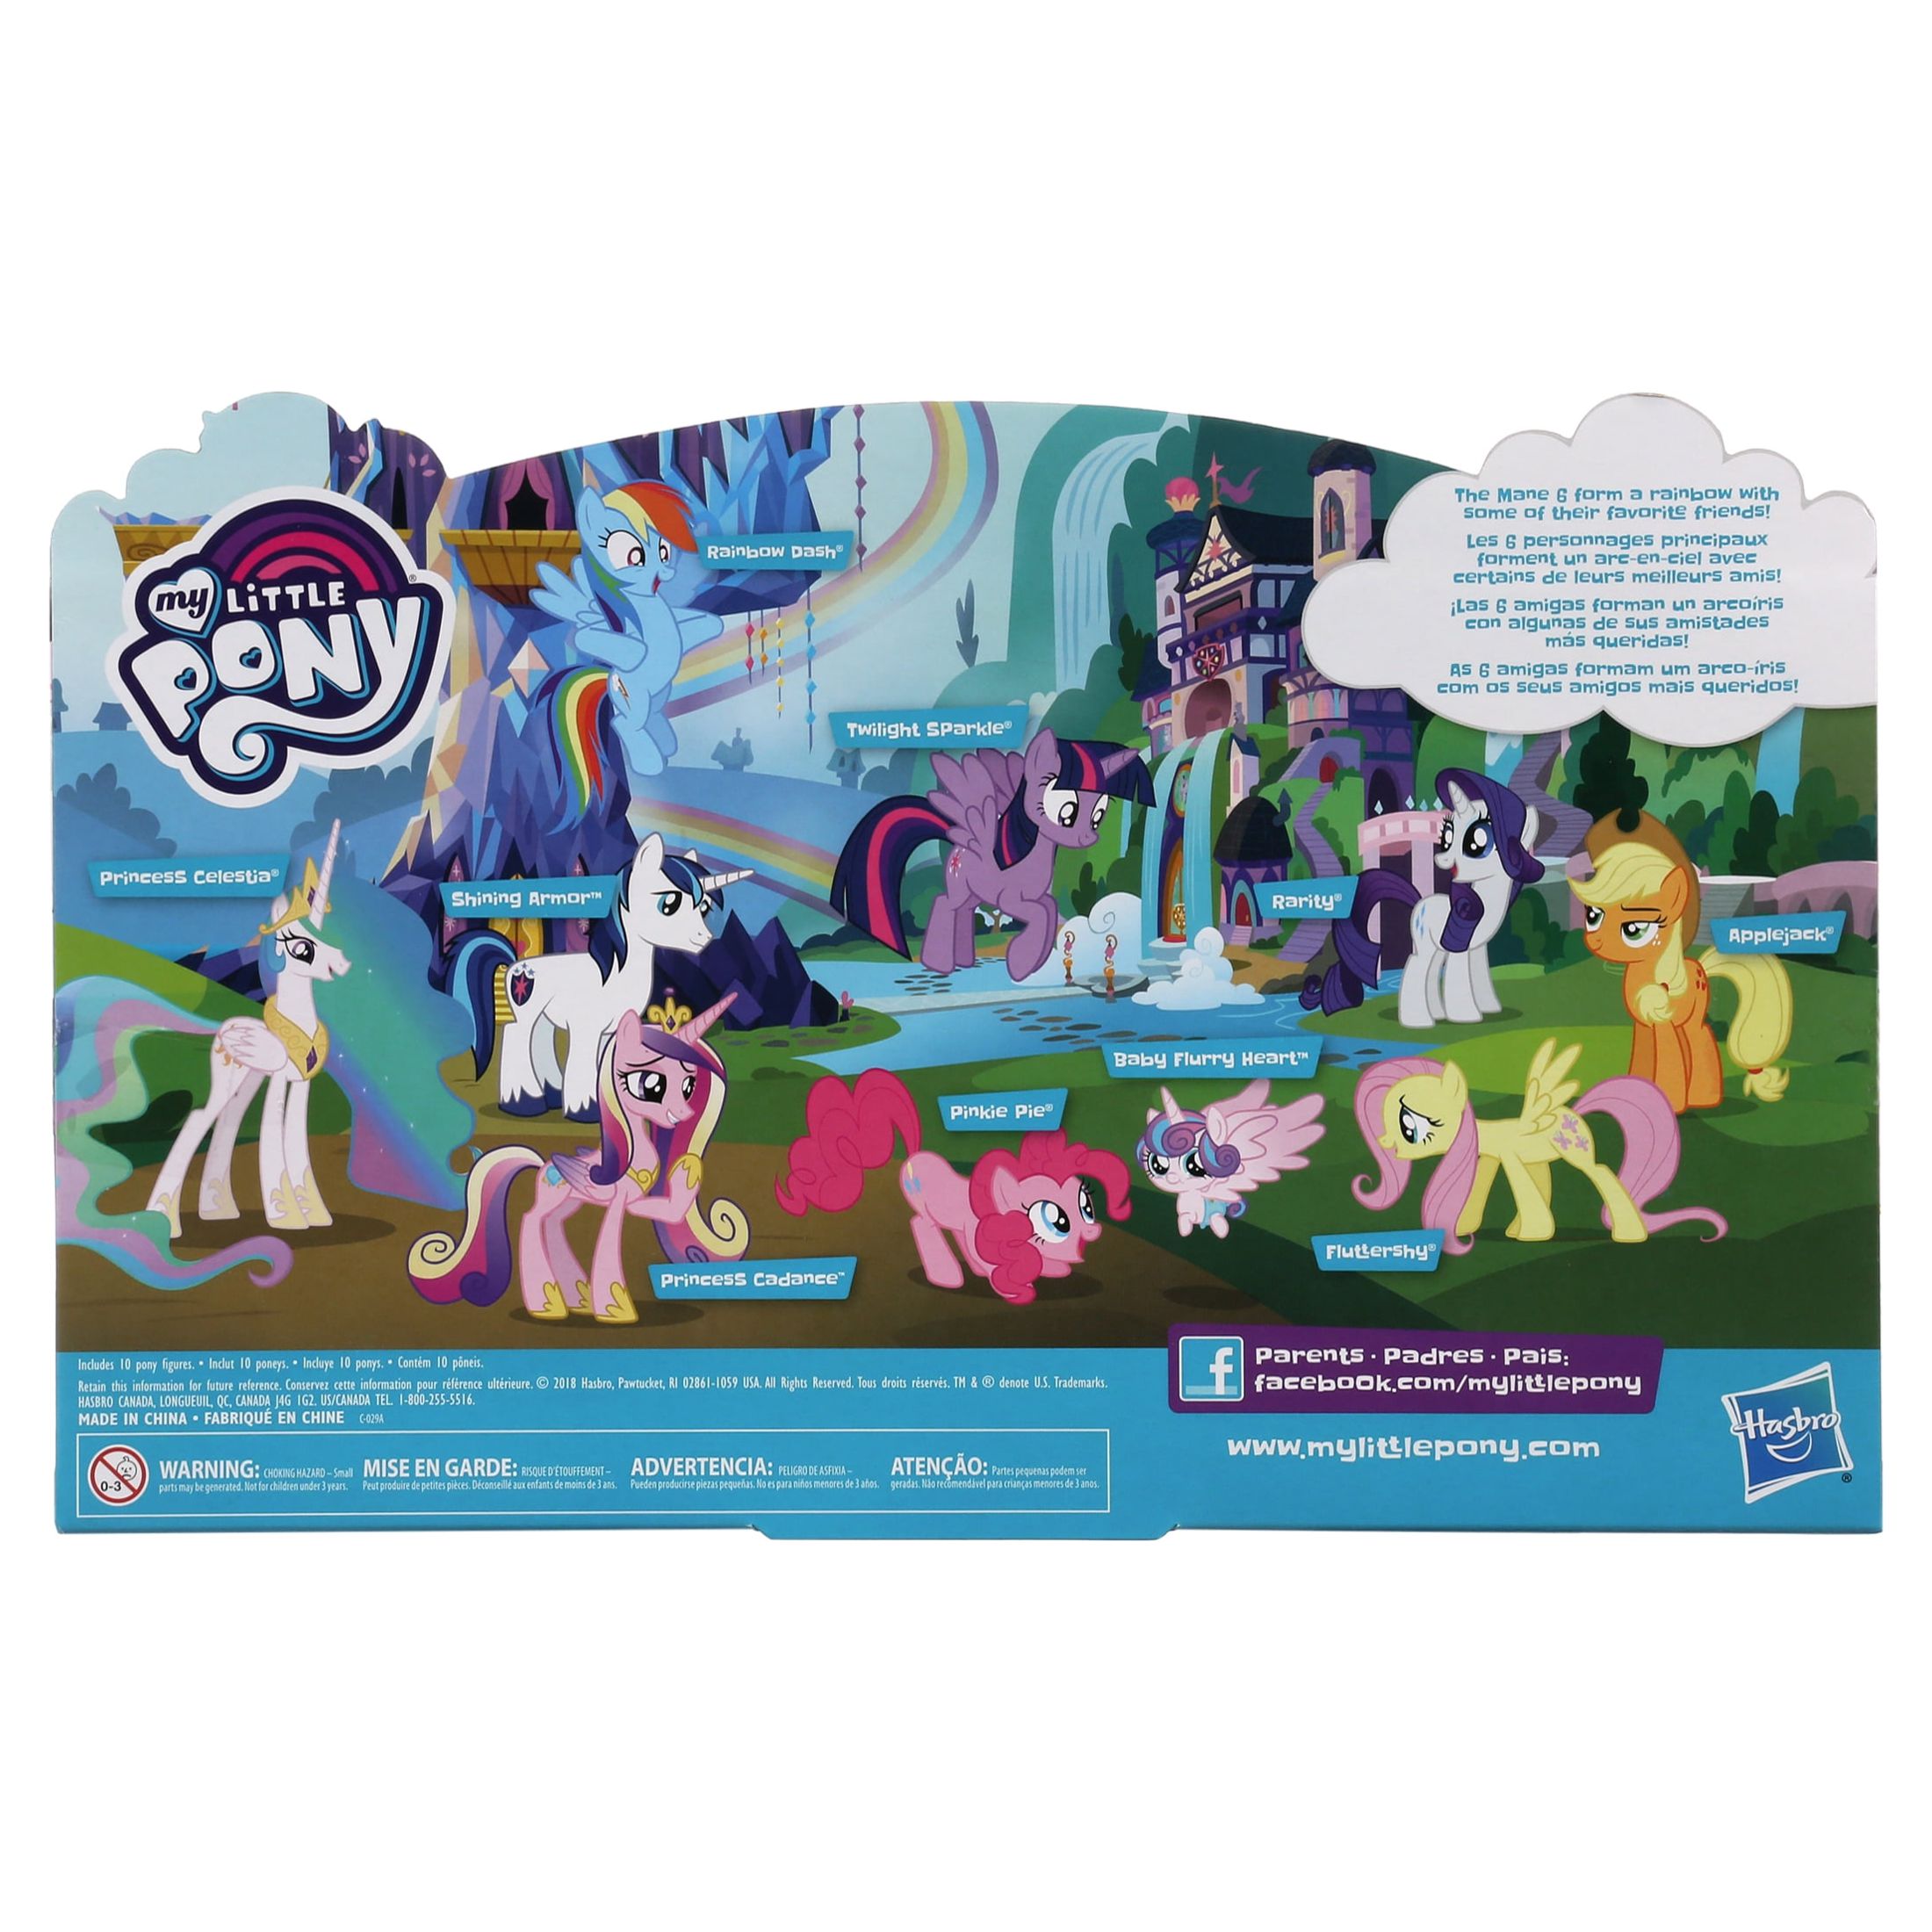 My Little Pony: Rainbow Equestria Favorites 13-Inch Doll Kids Toy for Boys and Girls - image 4 of 8